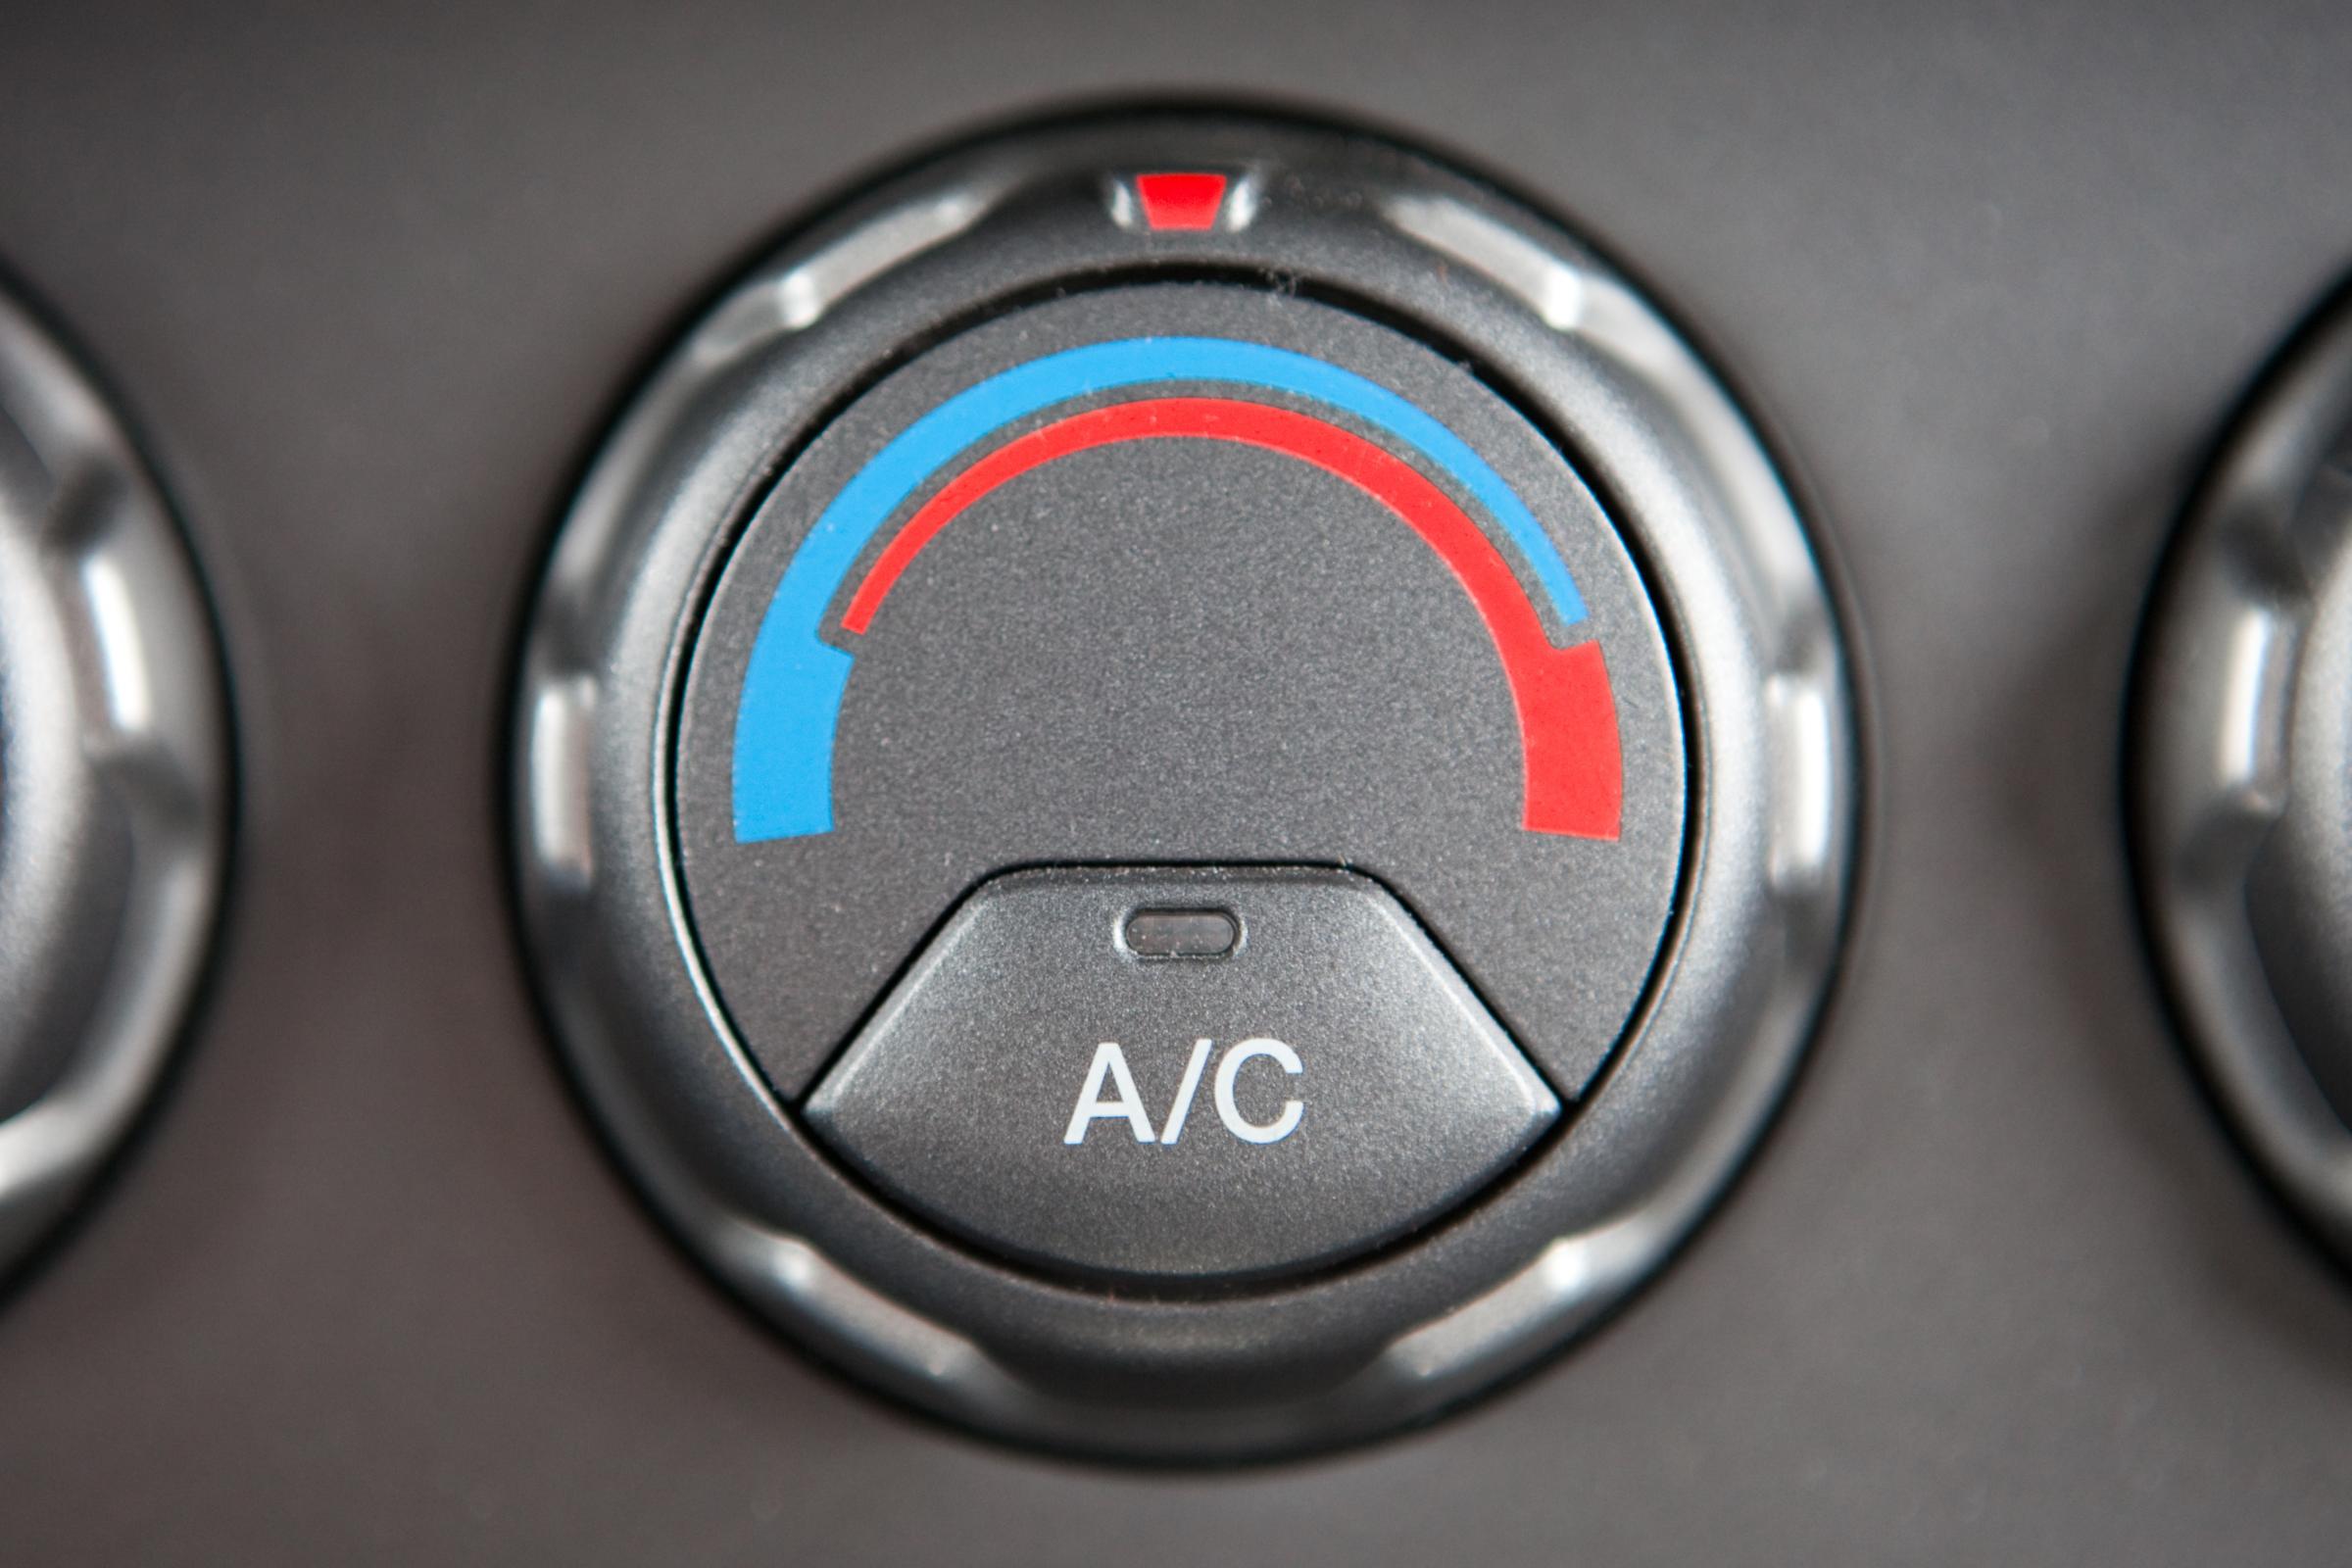 Hot/Cold Dial